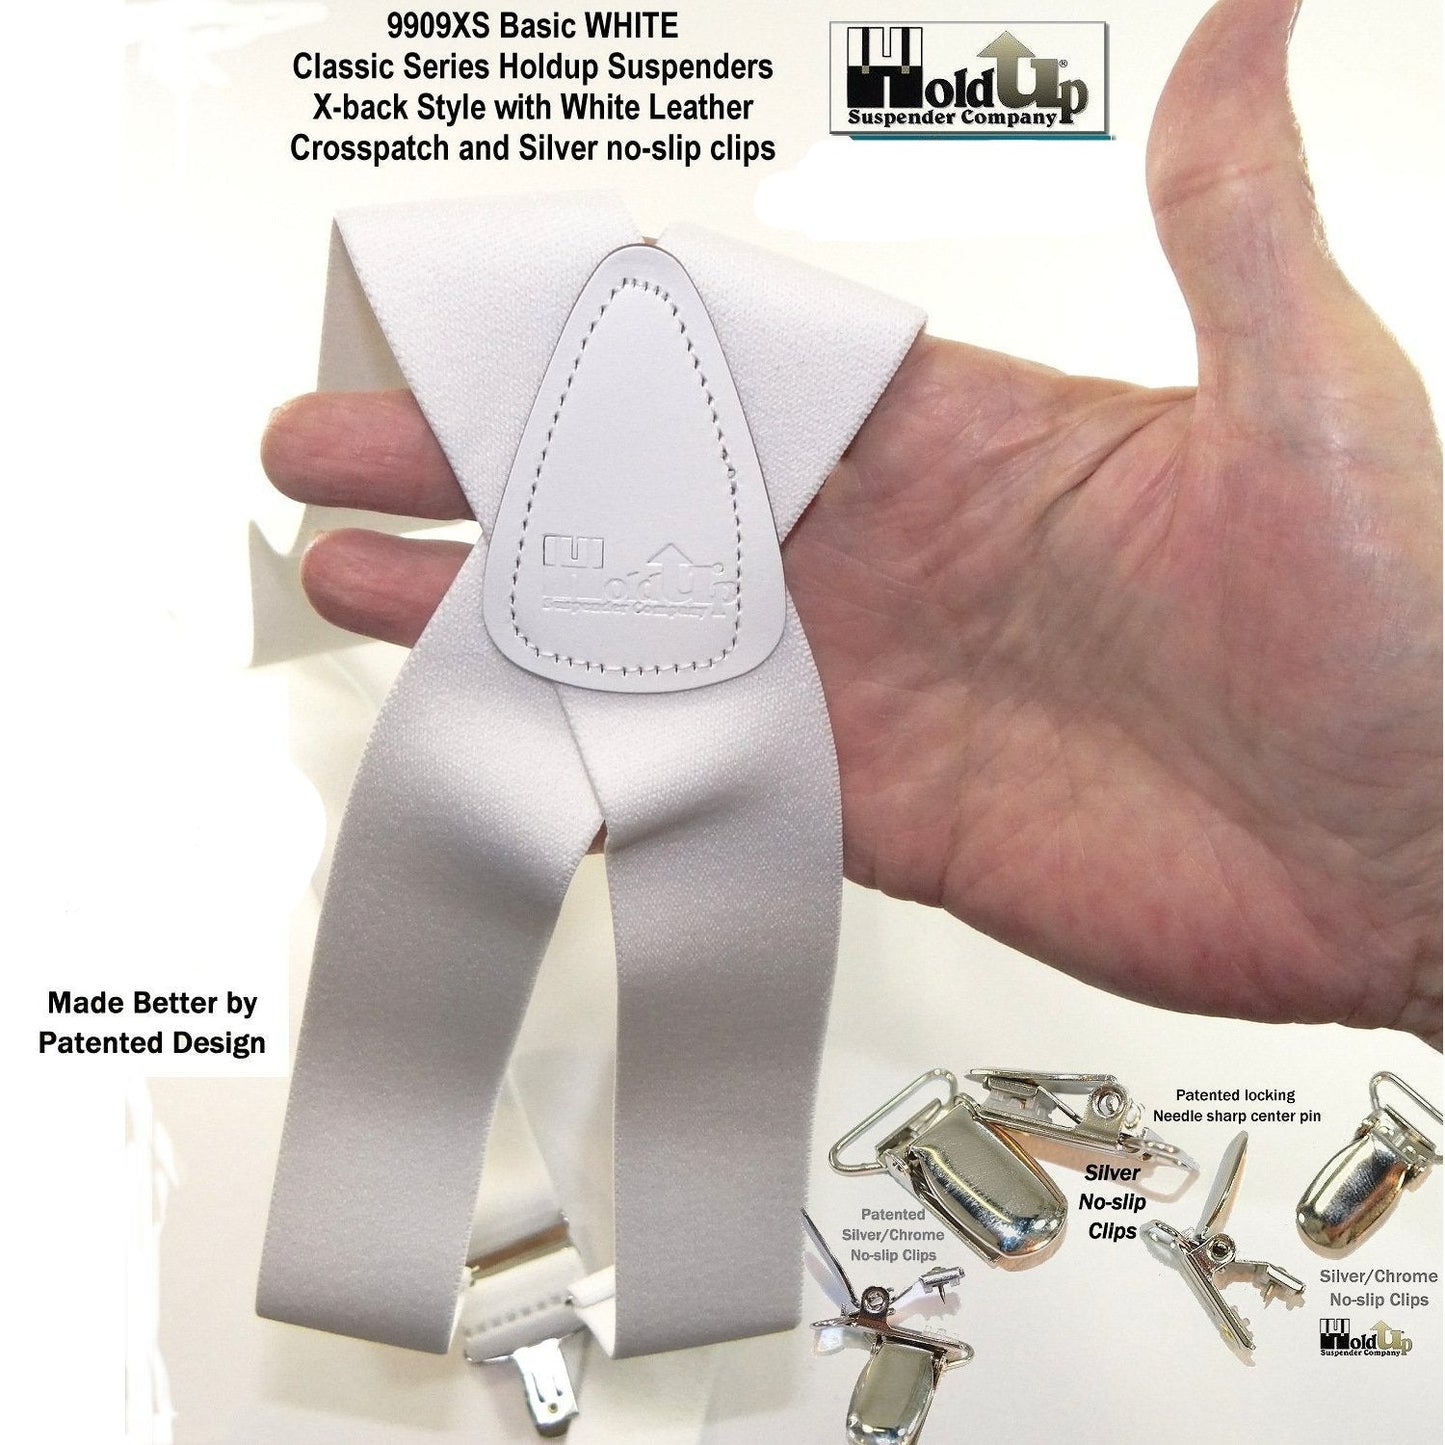 Holdup Suspender Company Classic Series All White X-back clip-on Suspenders with Patented Silver No-slip